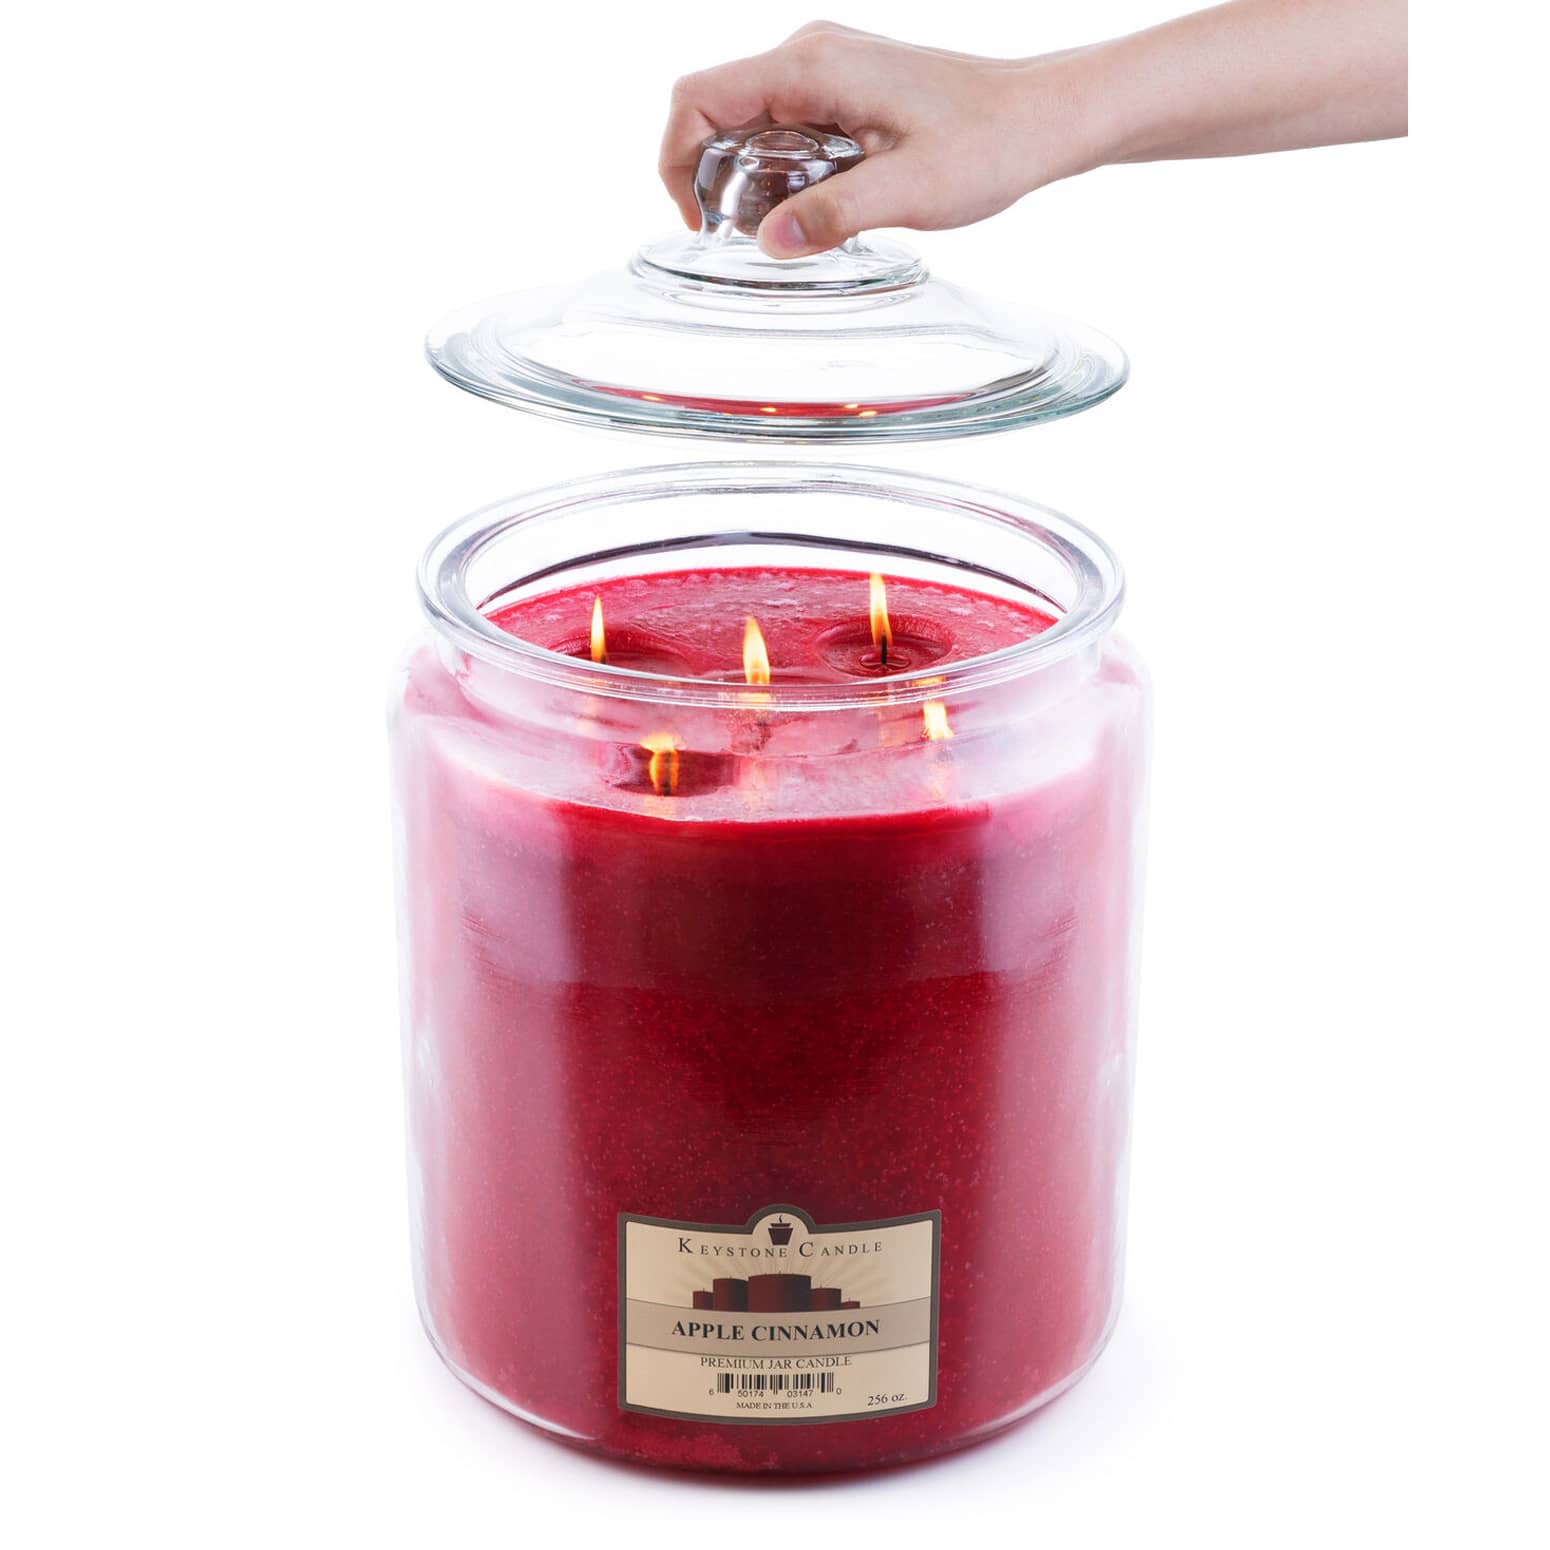 Giant Jar Candle - 2 Gallons / 25 Pounds / 500 Hour Burn Time